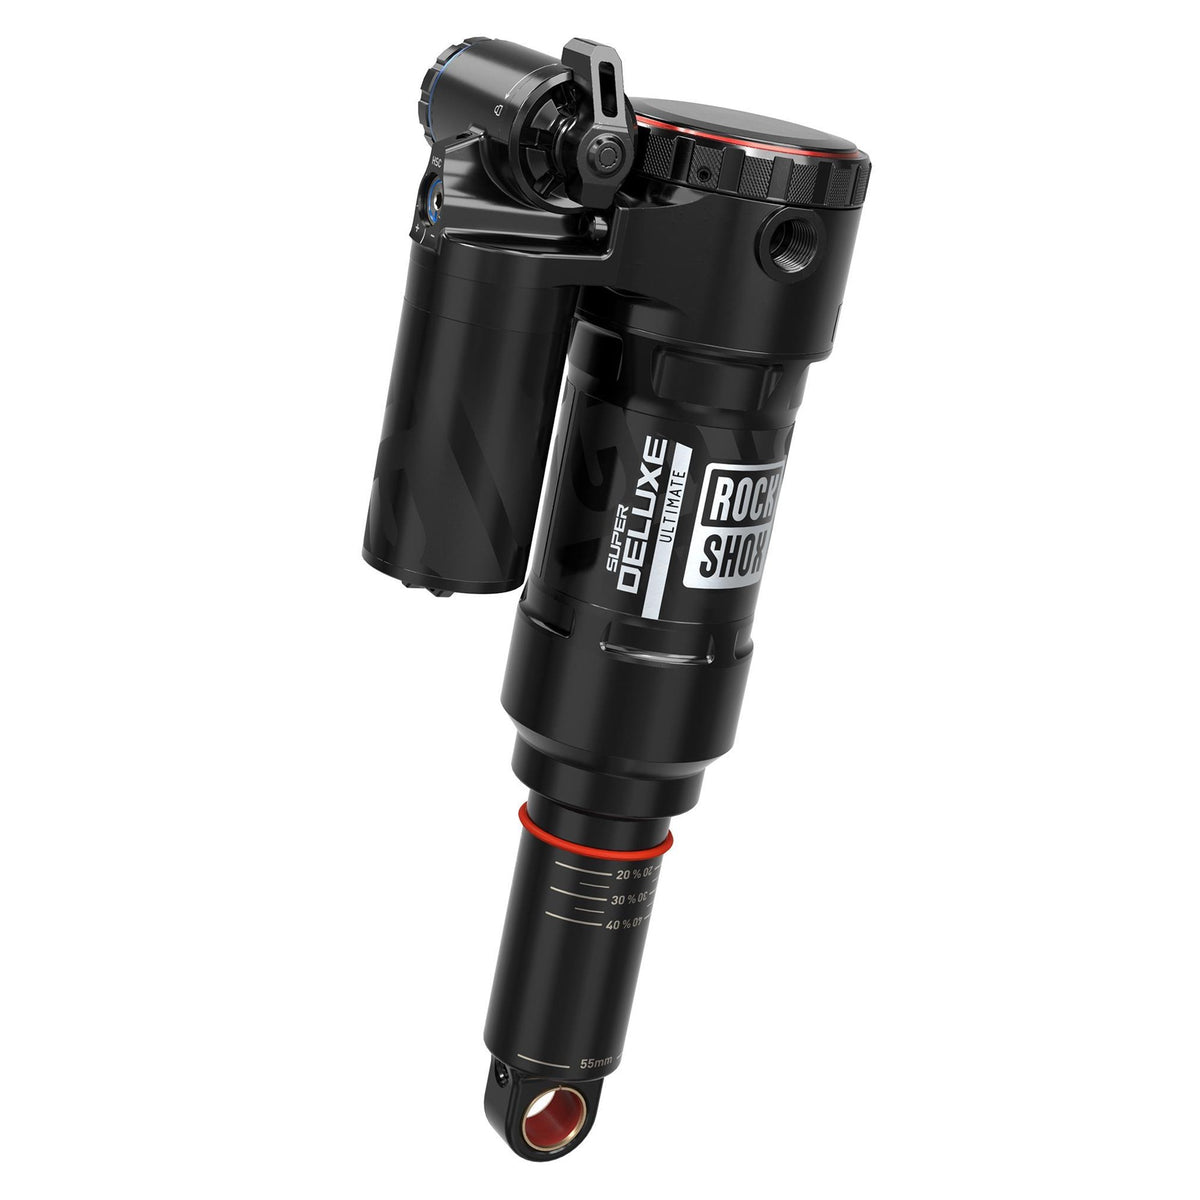 Rockshox Rear Shock Super Deluxe Ultimate Rc2T - Linear Air, 0 Neg/1 Pos Token, Linearreb/Lowcomp,320Lb Theshold, Trunnion Standard - C1